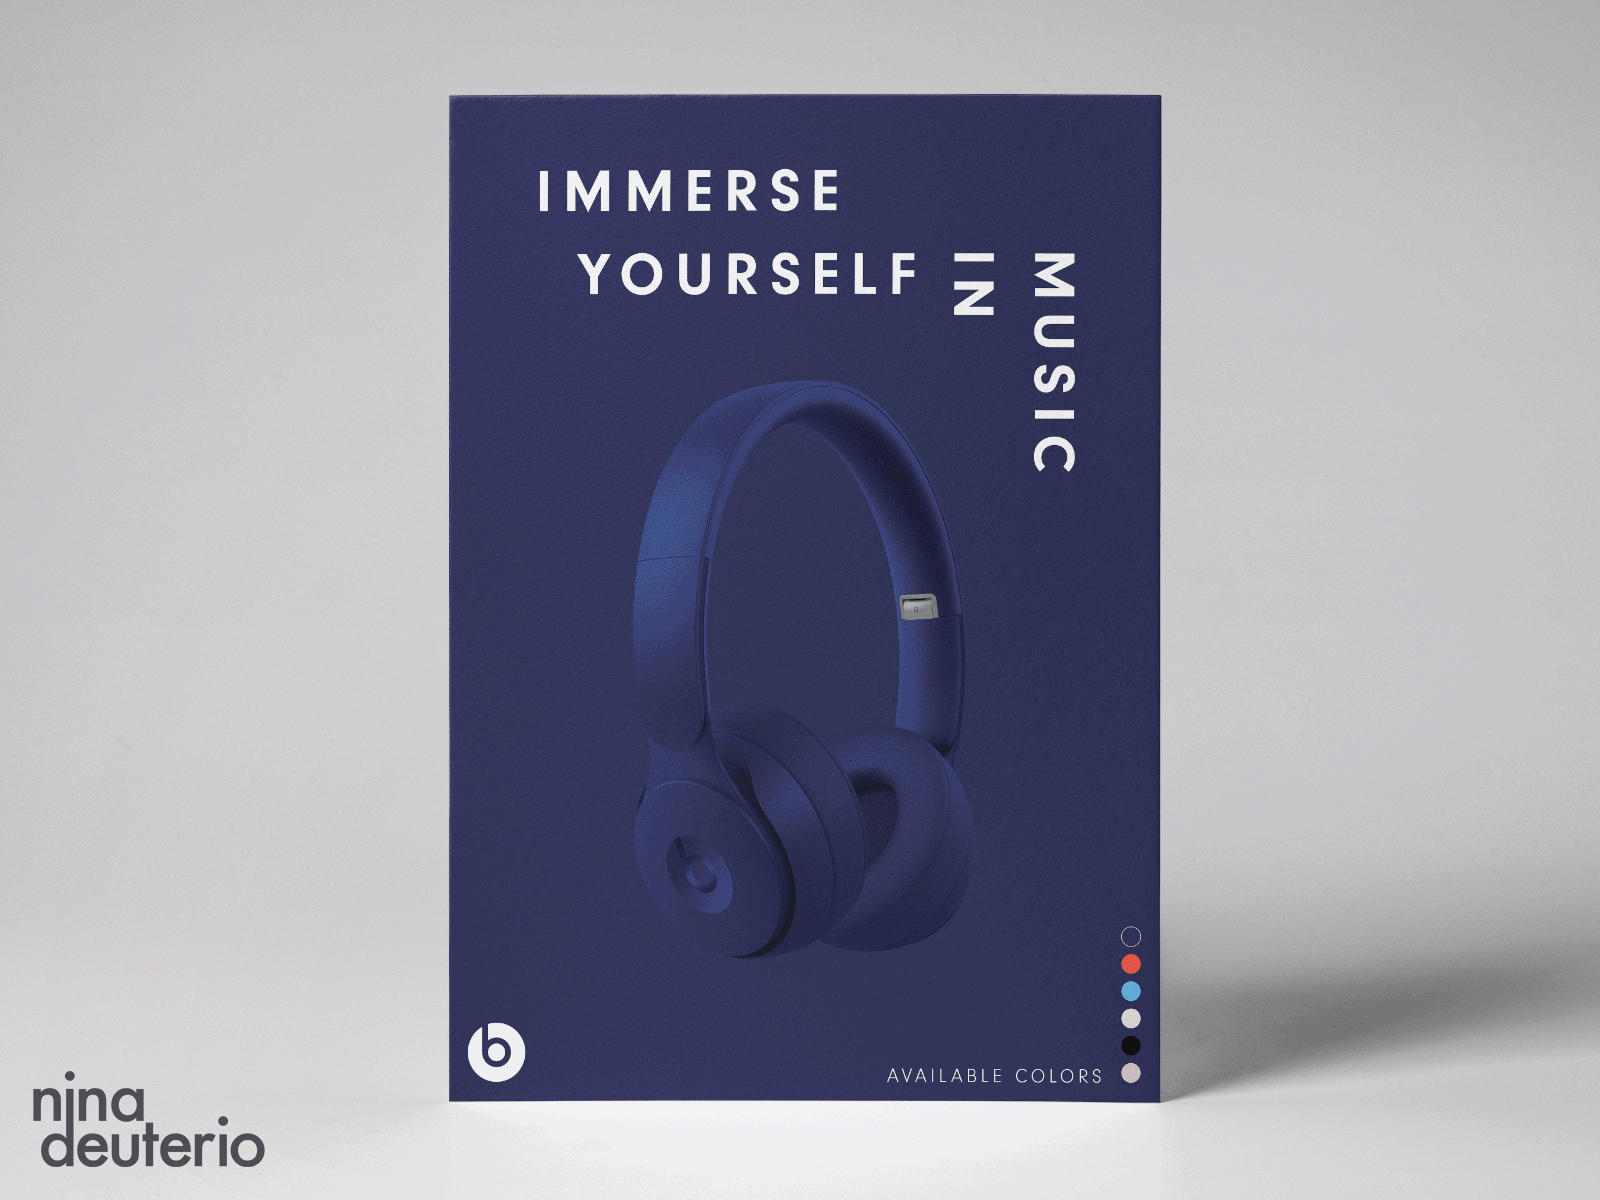 Beats By Dre Headphones Advertisement Layout Design advertisement design animation beats beats by dre branding design layout layoutdesign marketing marketing campaign music print design typography